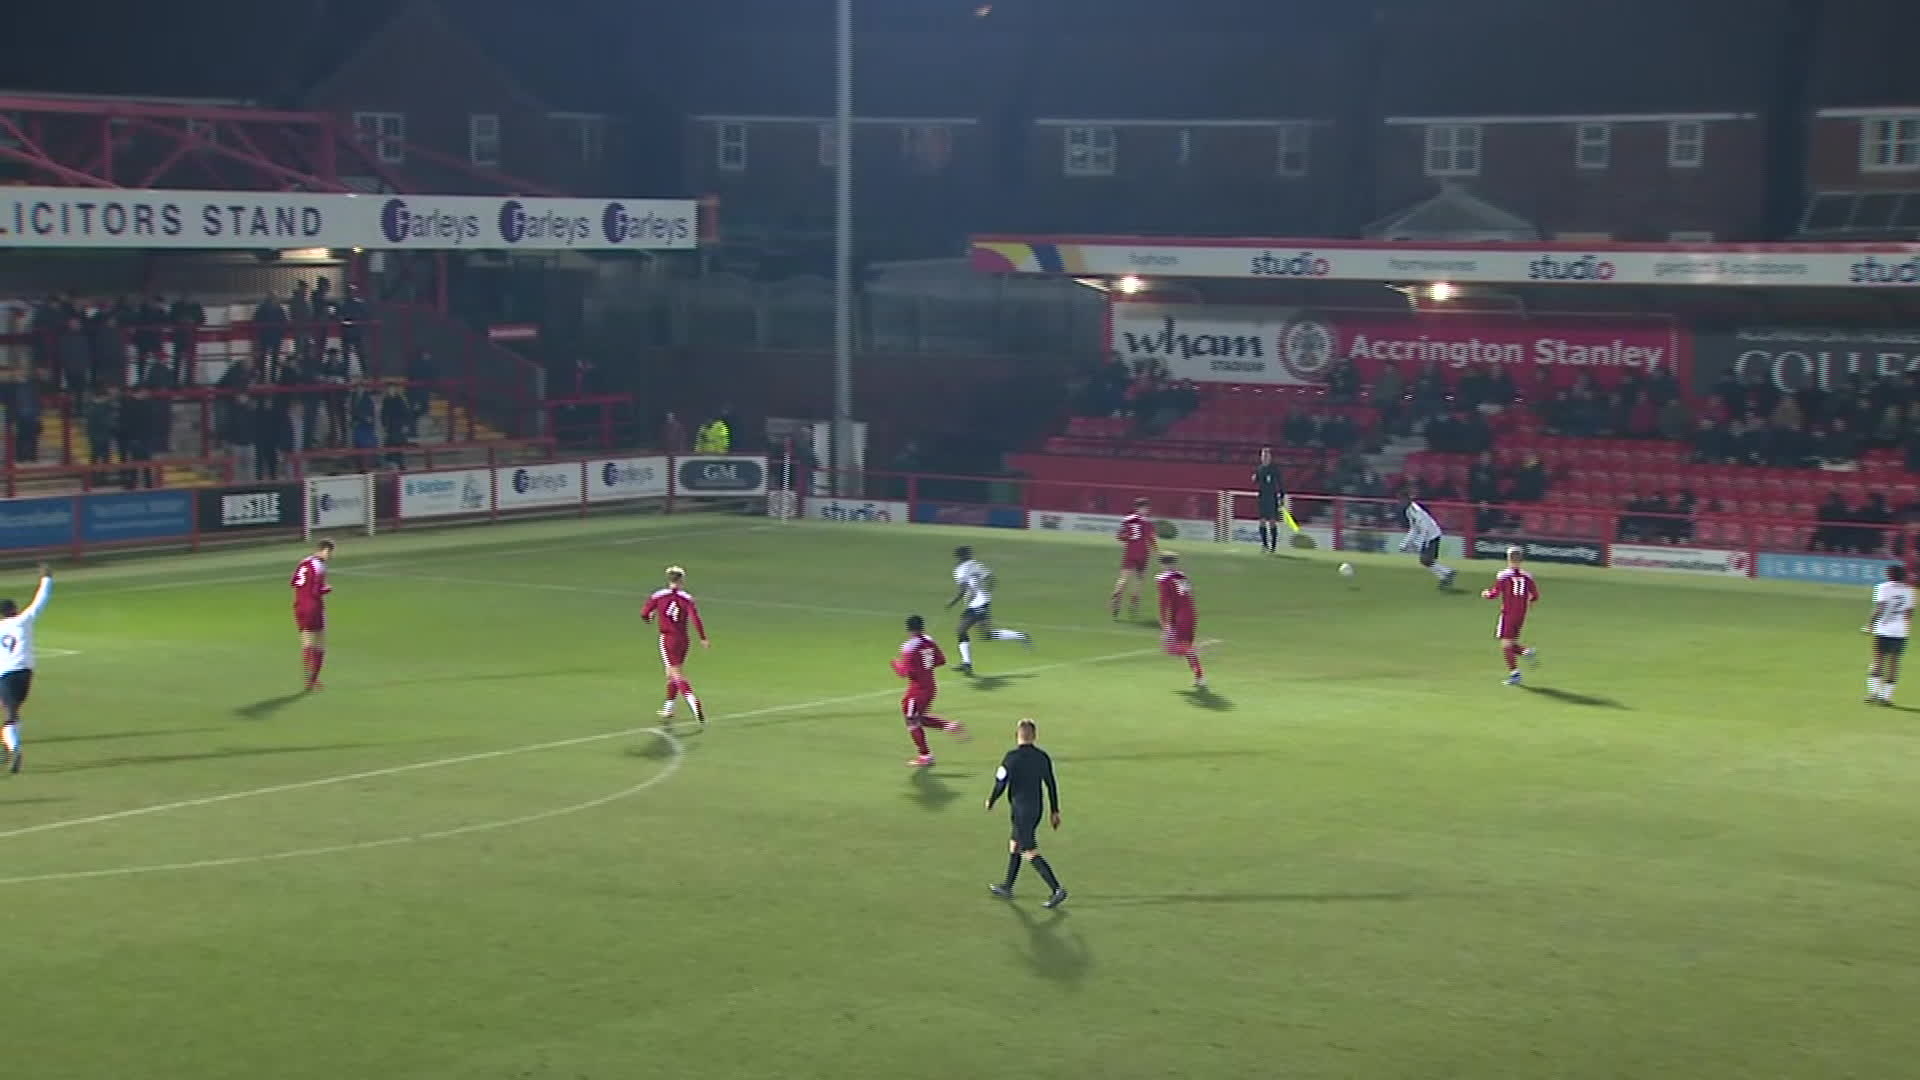 FA YOUTH CUP | Accrington Stanley 1 Charlton 2 (January 2022)